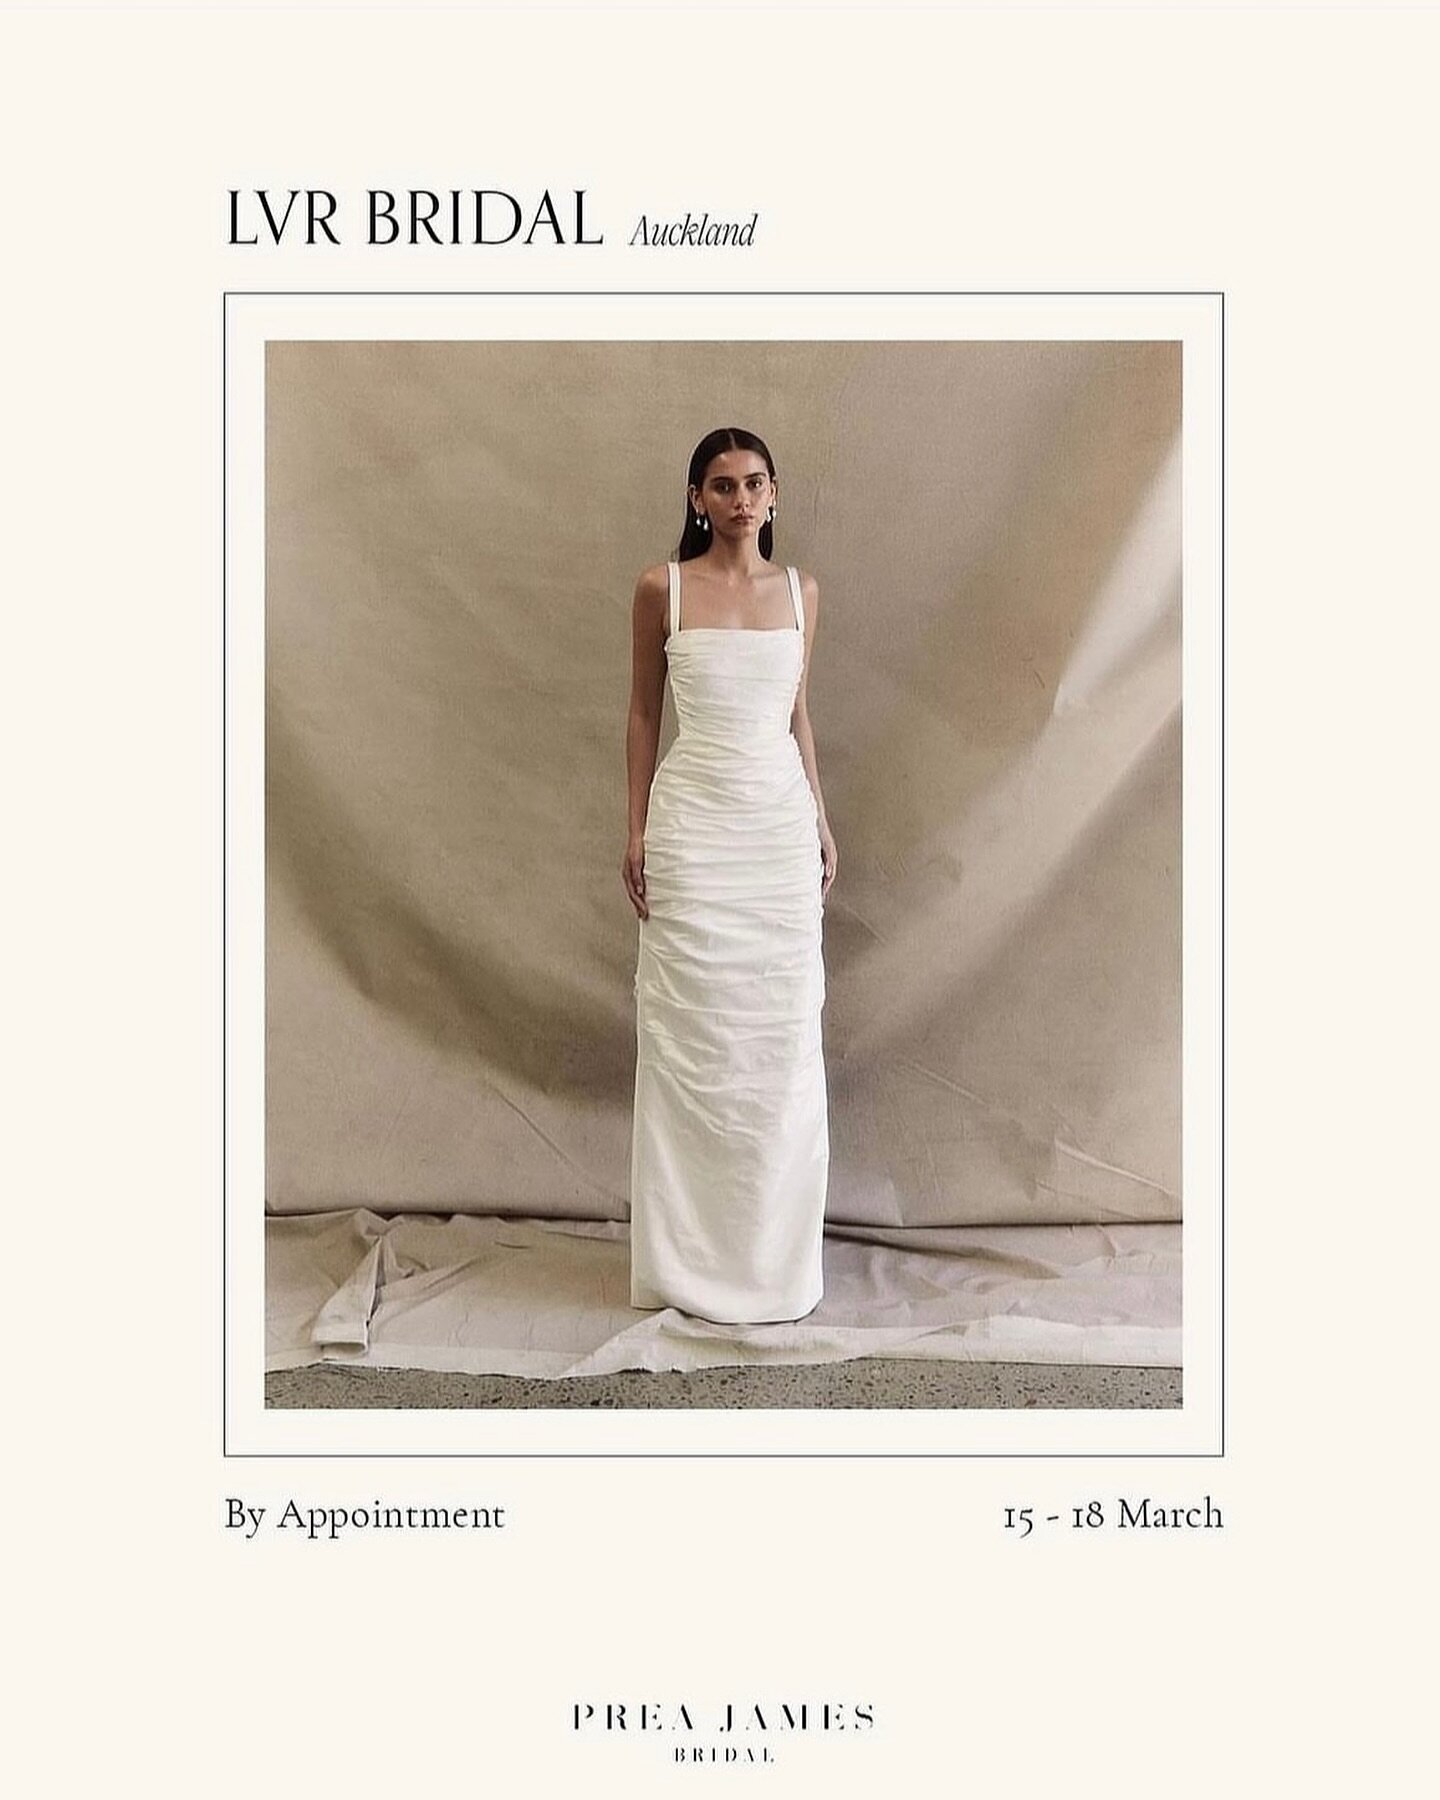 AUCKLAND TRUNK SHOW | Can&rsquo;t wait for our New Zealand debut at @lvr_bridal this month! Showcasing  the Allure collection 15 - 18 March, be sure to book an appointment via the Trunk Shows link in our bio to not miss out 🫶🏼